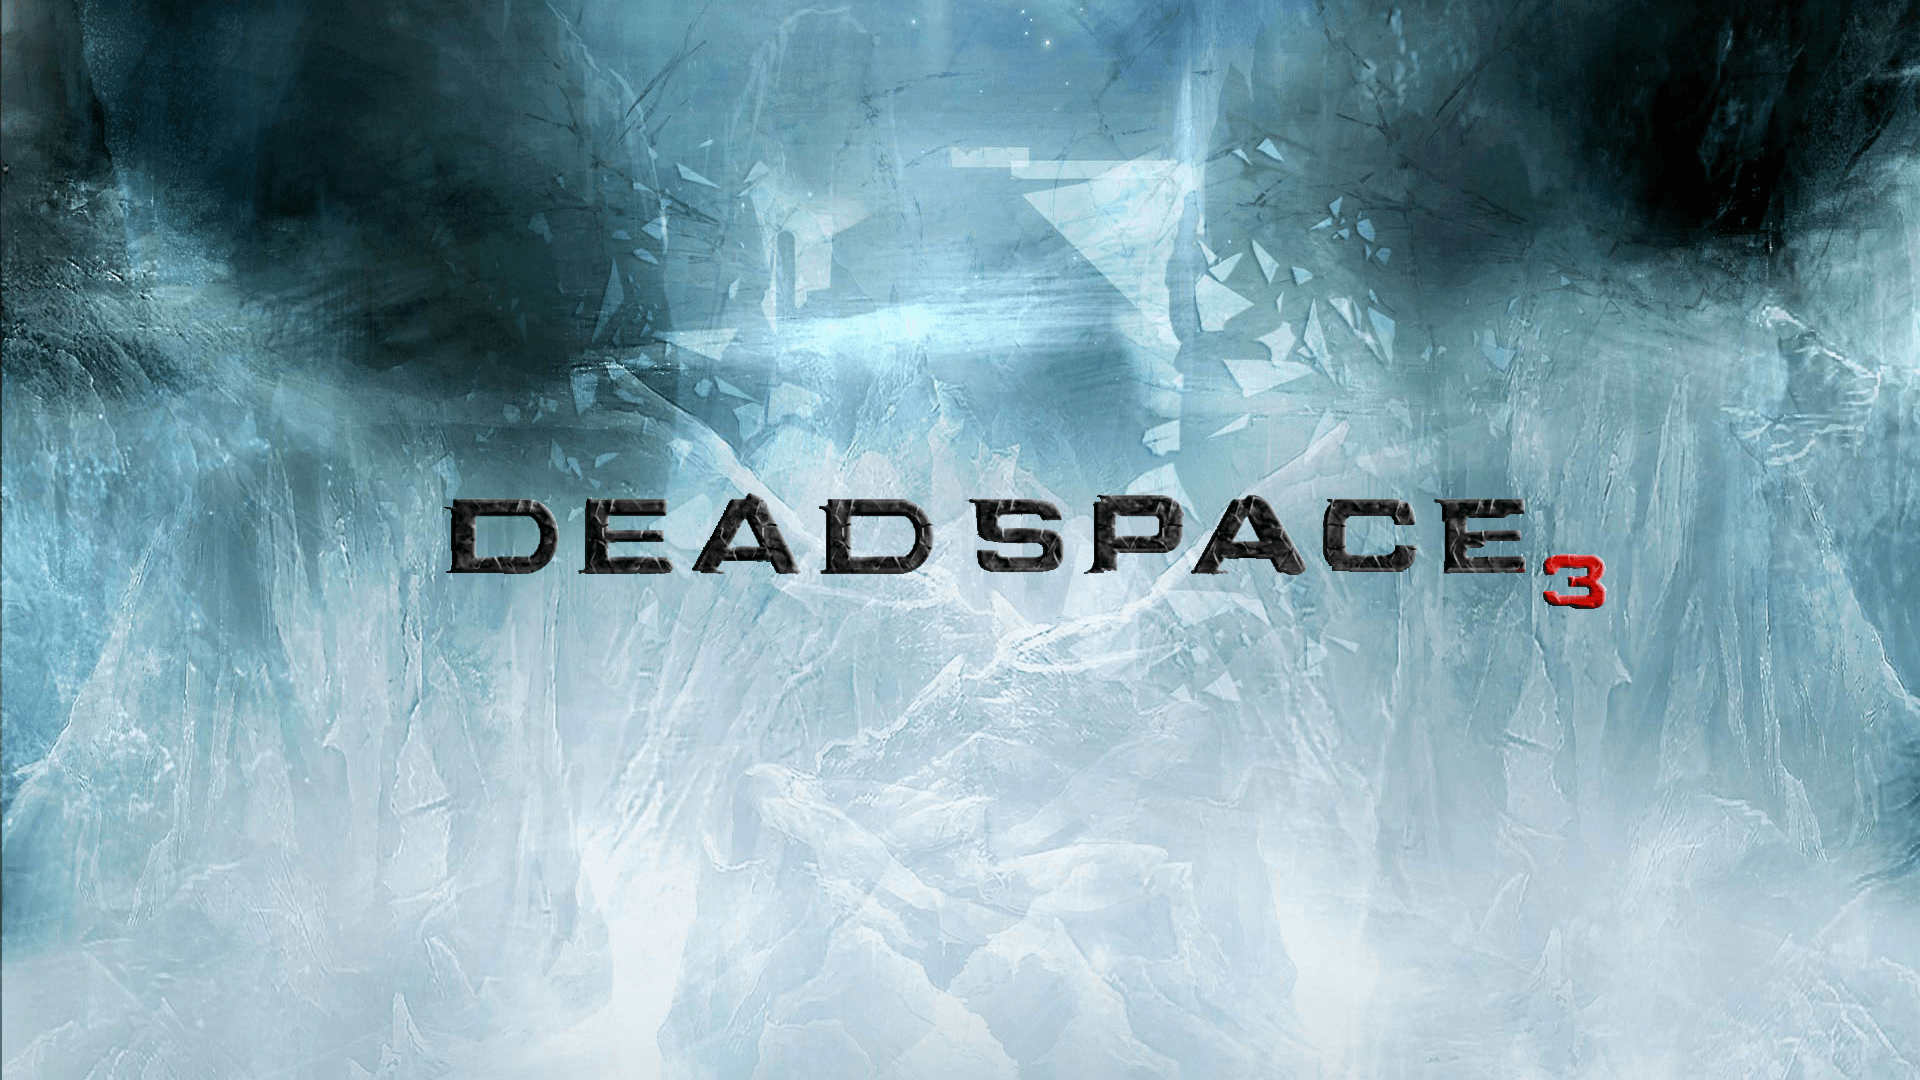 Dead Space Wallpaper for Computer